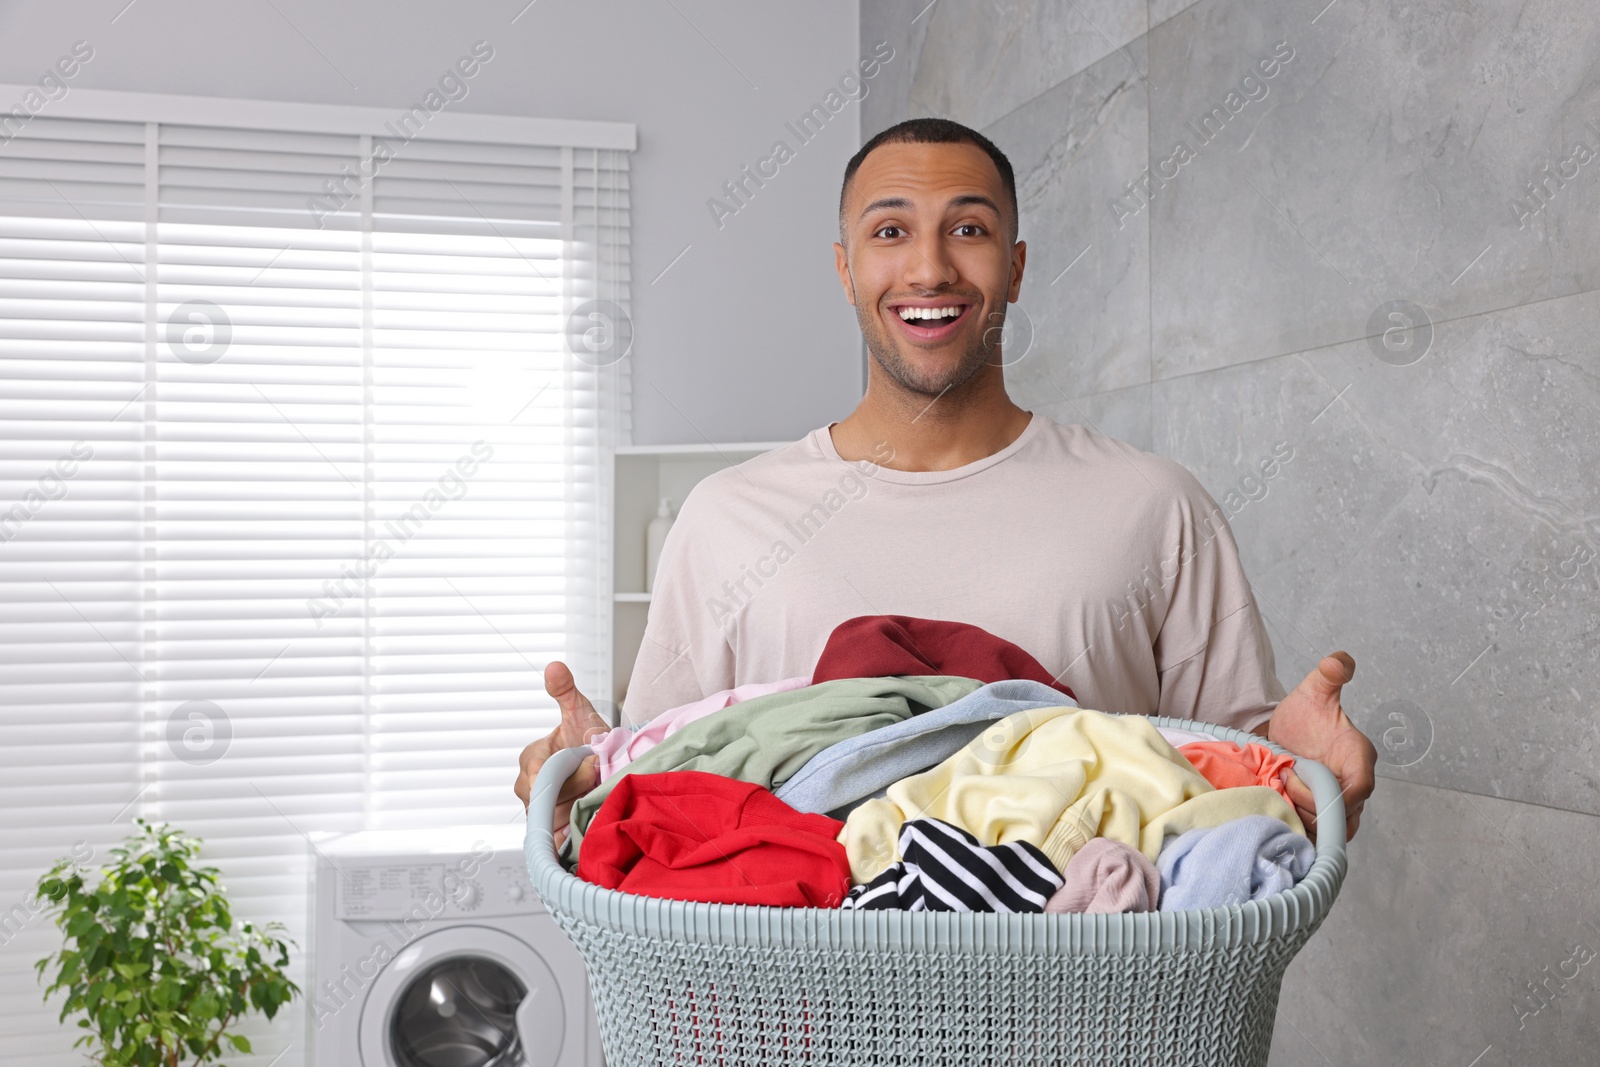 Photo of Emotional man with basket full of laundry in bathroom. Space for text